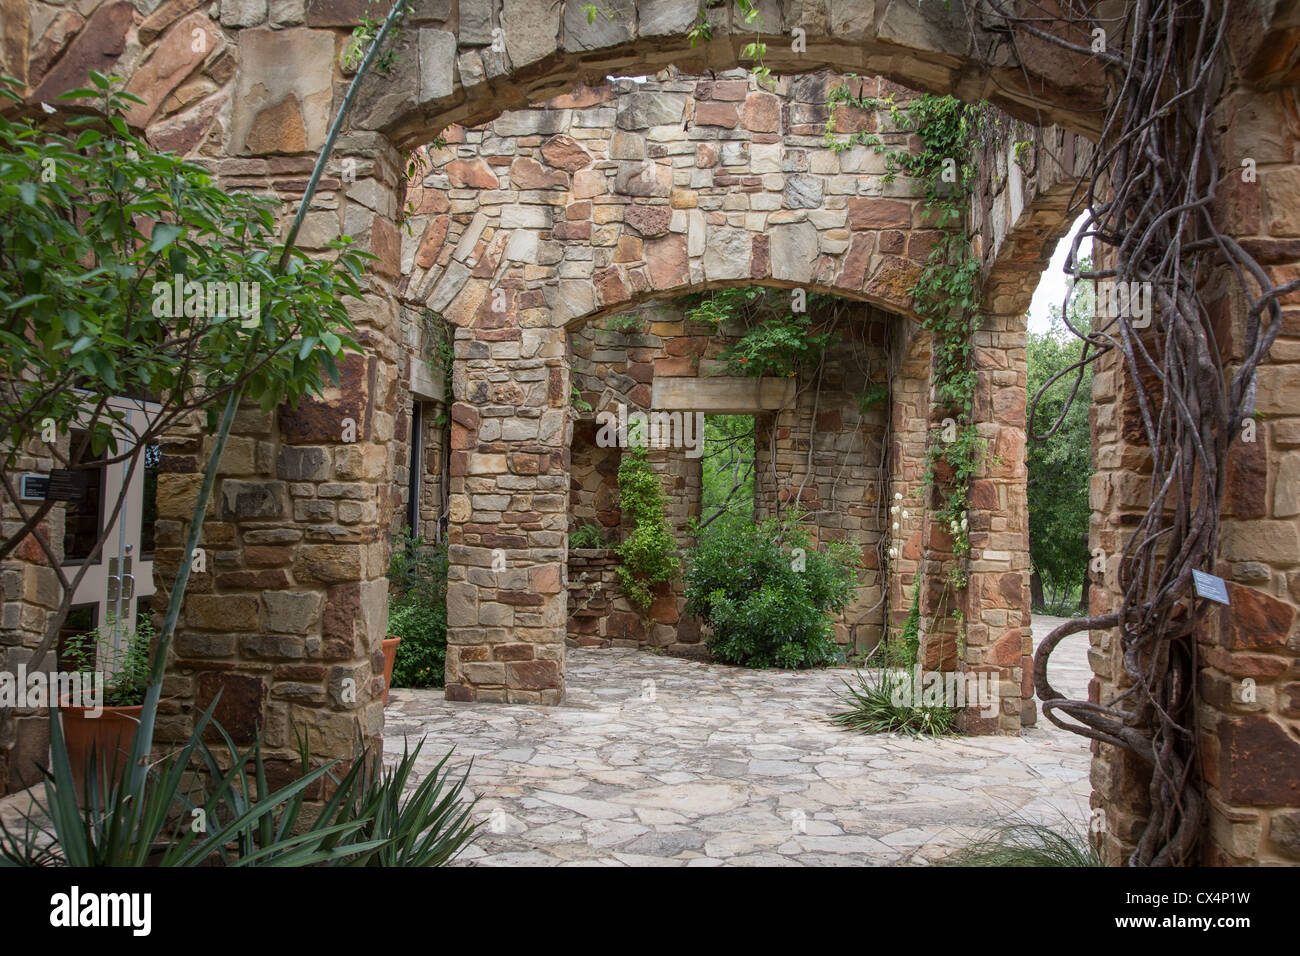 Vine-covered Stone archways at the Lady Bird Johnson Wildflower Center in Austin, Texas Stock Photo